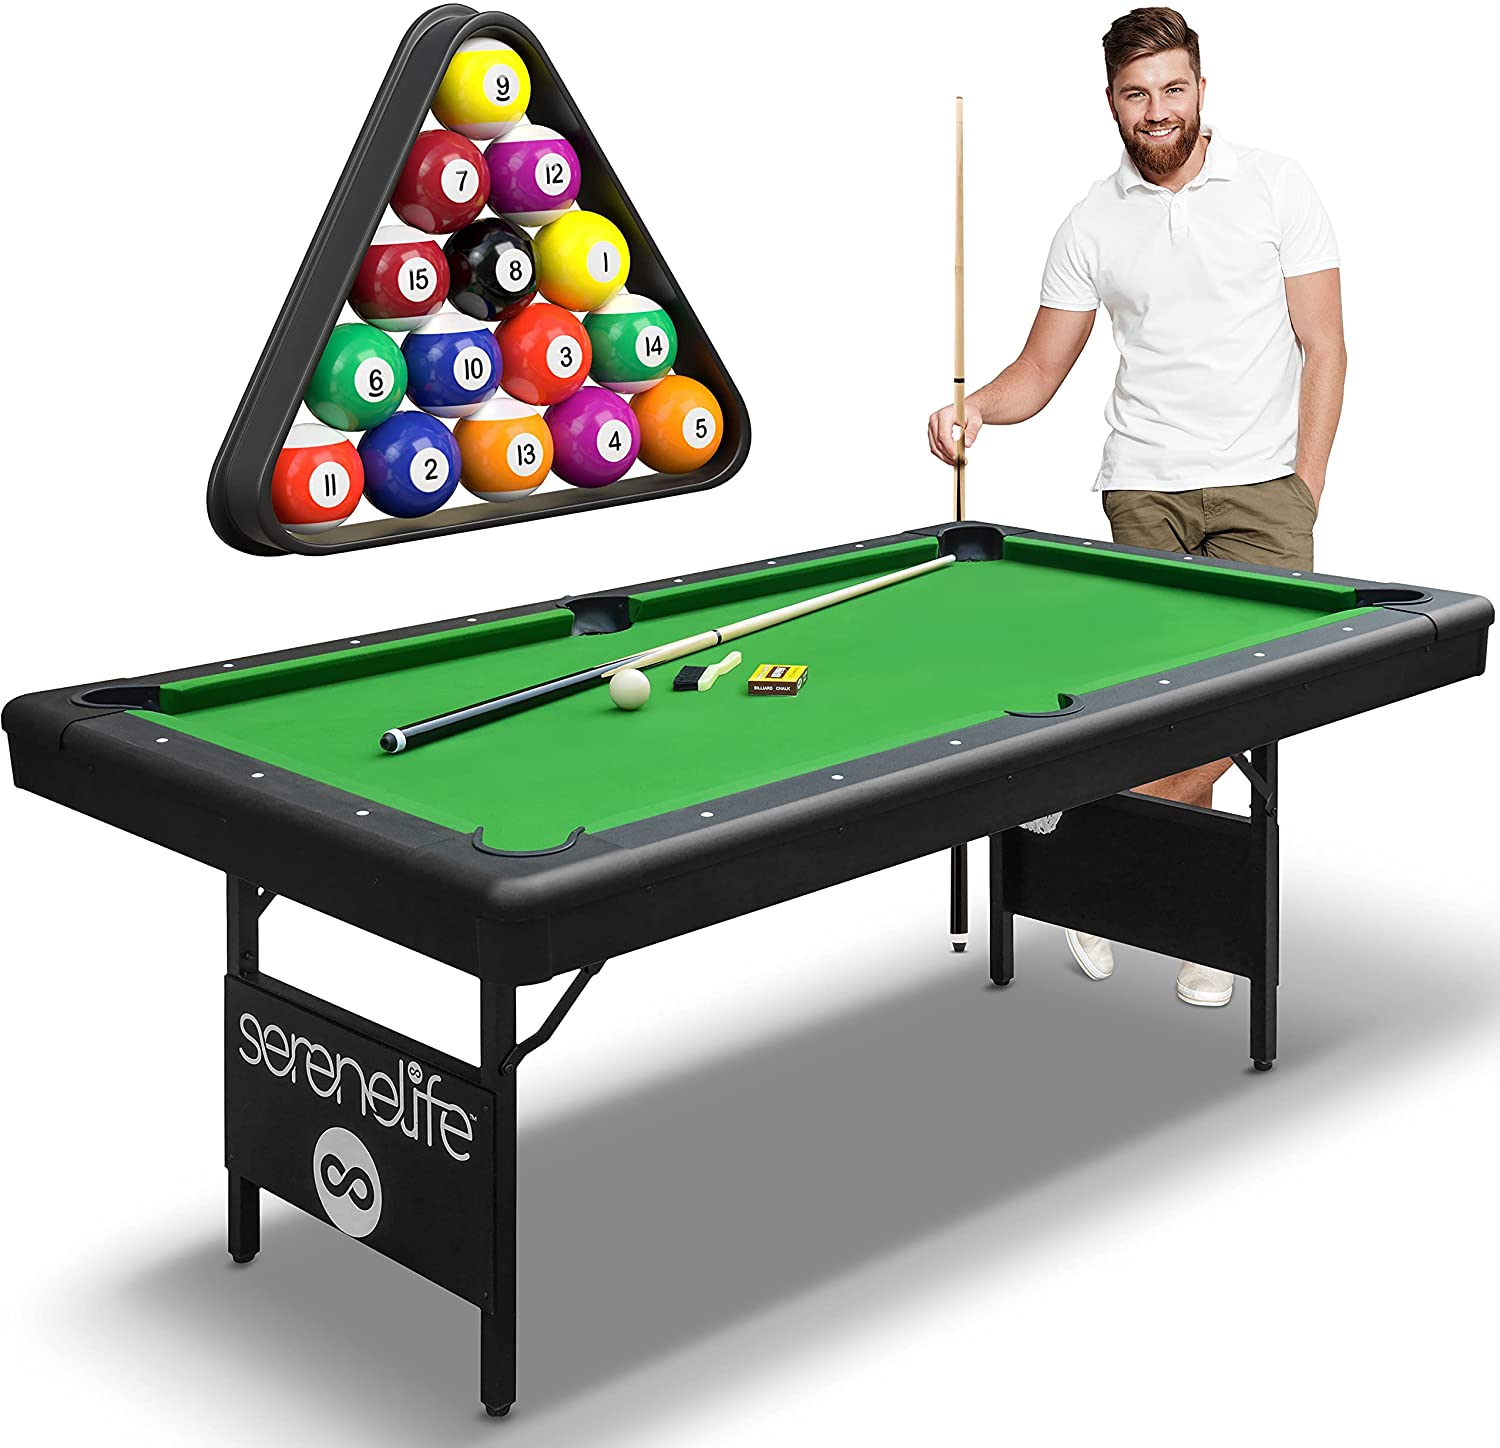 SereneLife 6-Ft Folding Pool Table - 76 Inch Foldable Billiard Game Table for Kids and Adults w: Accessories, Includes Set of Billiard Balls, 2 Cues, Brush,